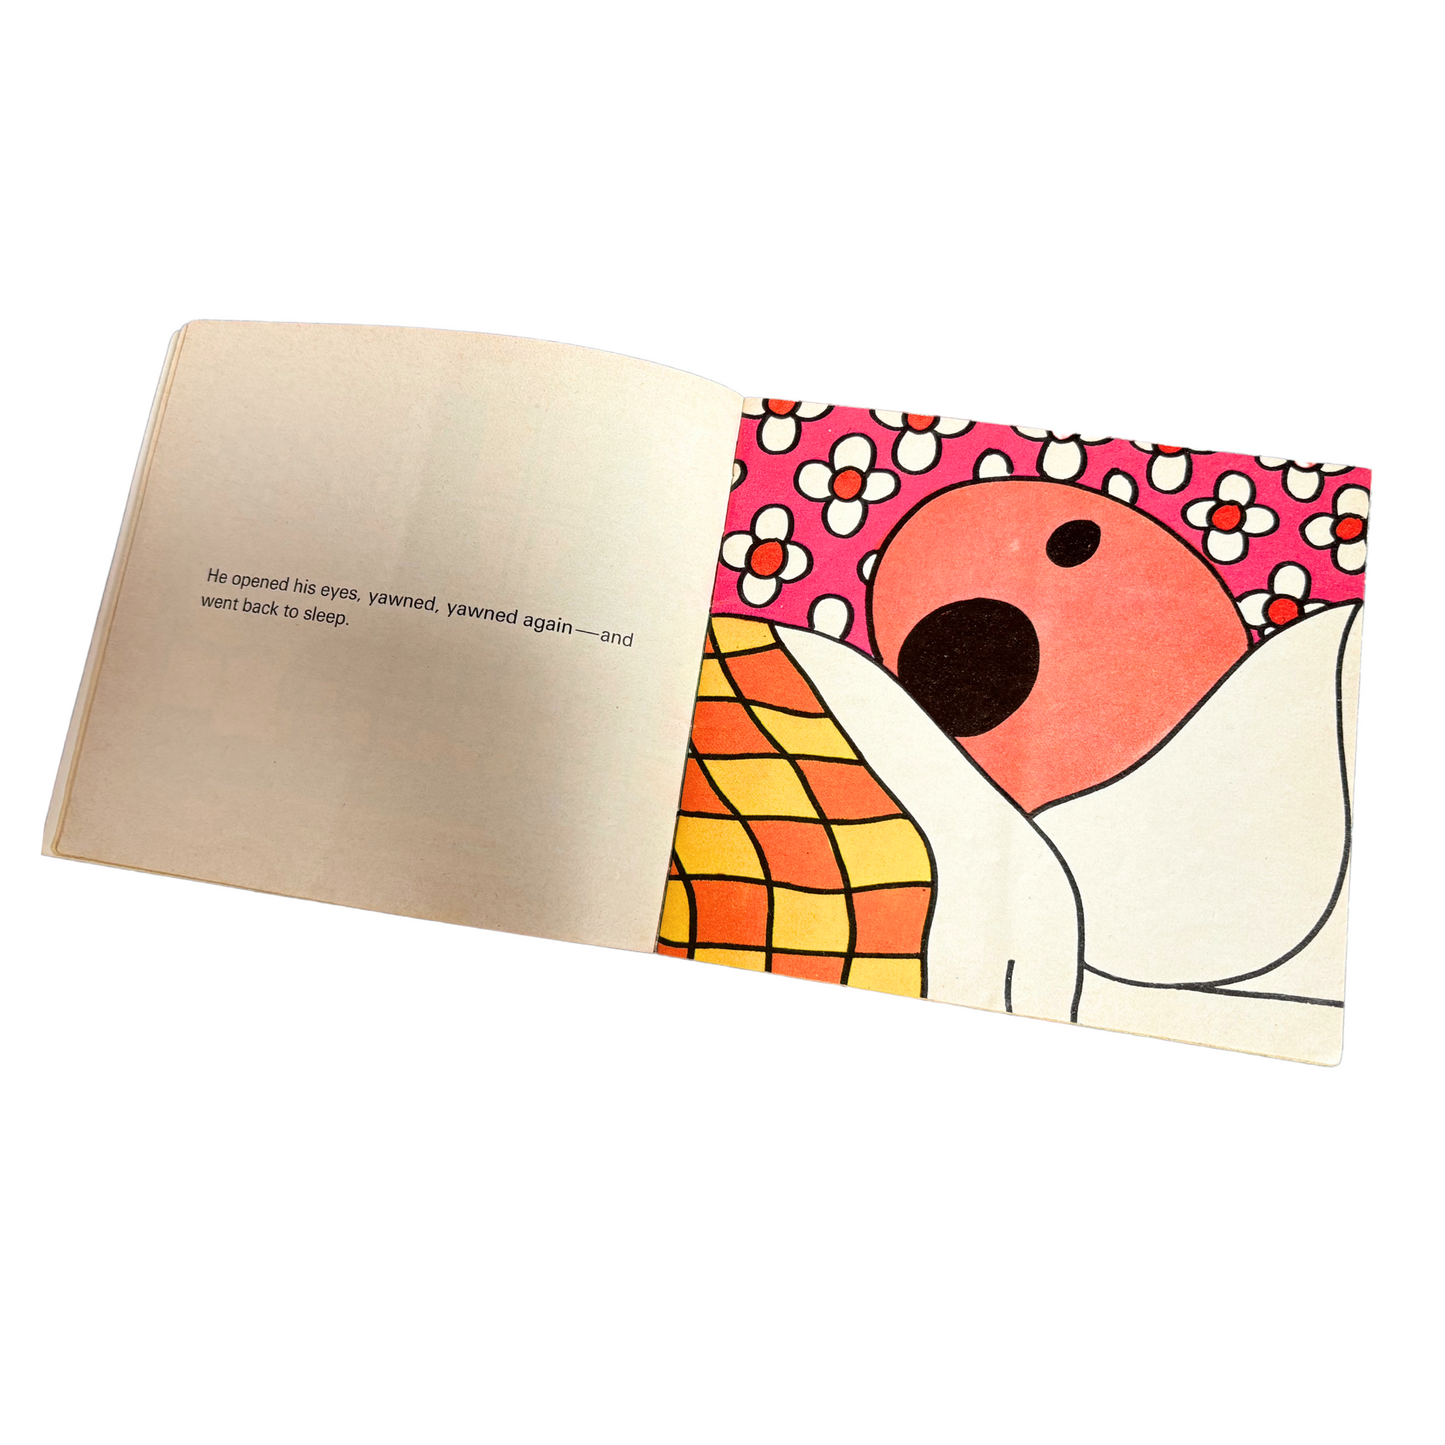 Mr. Lazy by Roger Hargreaves. Original 1970s The Mr Men series. 1976   edition.Great gift idea